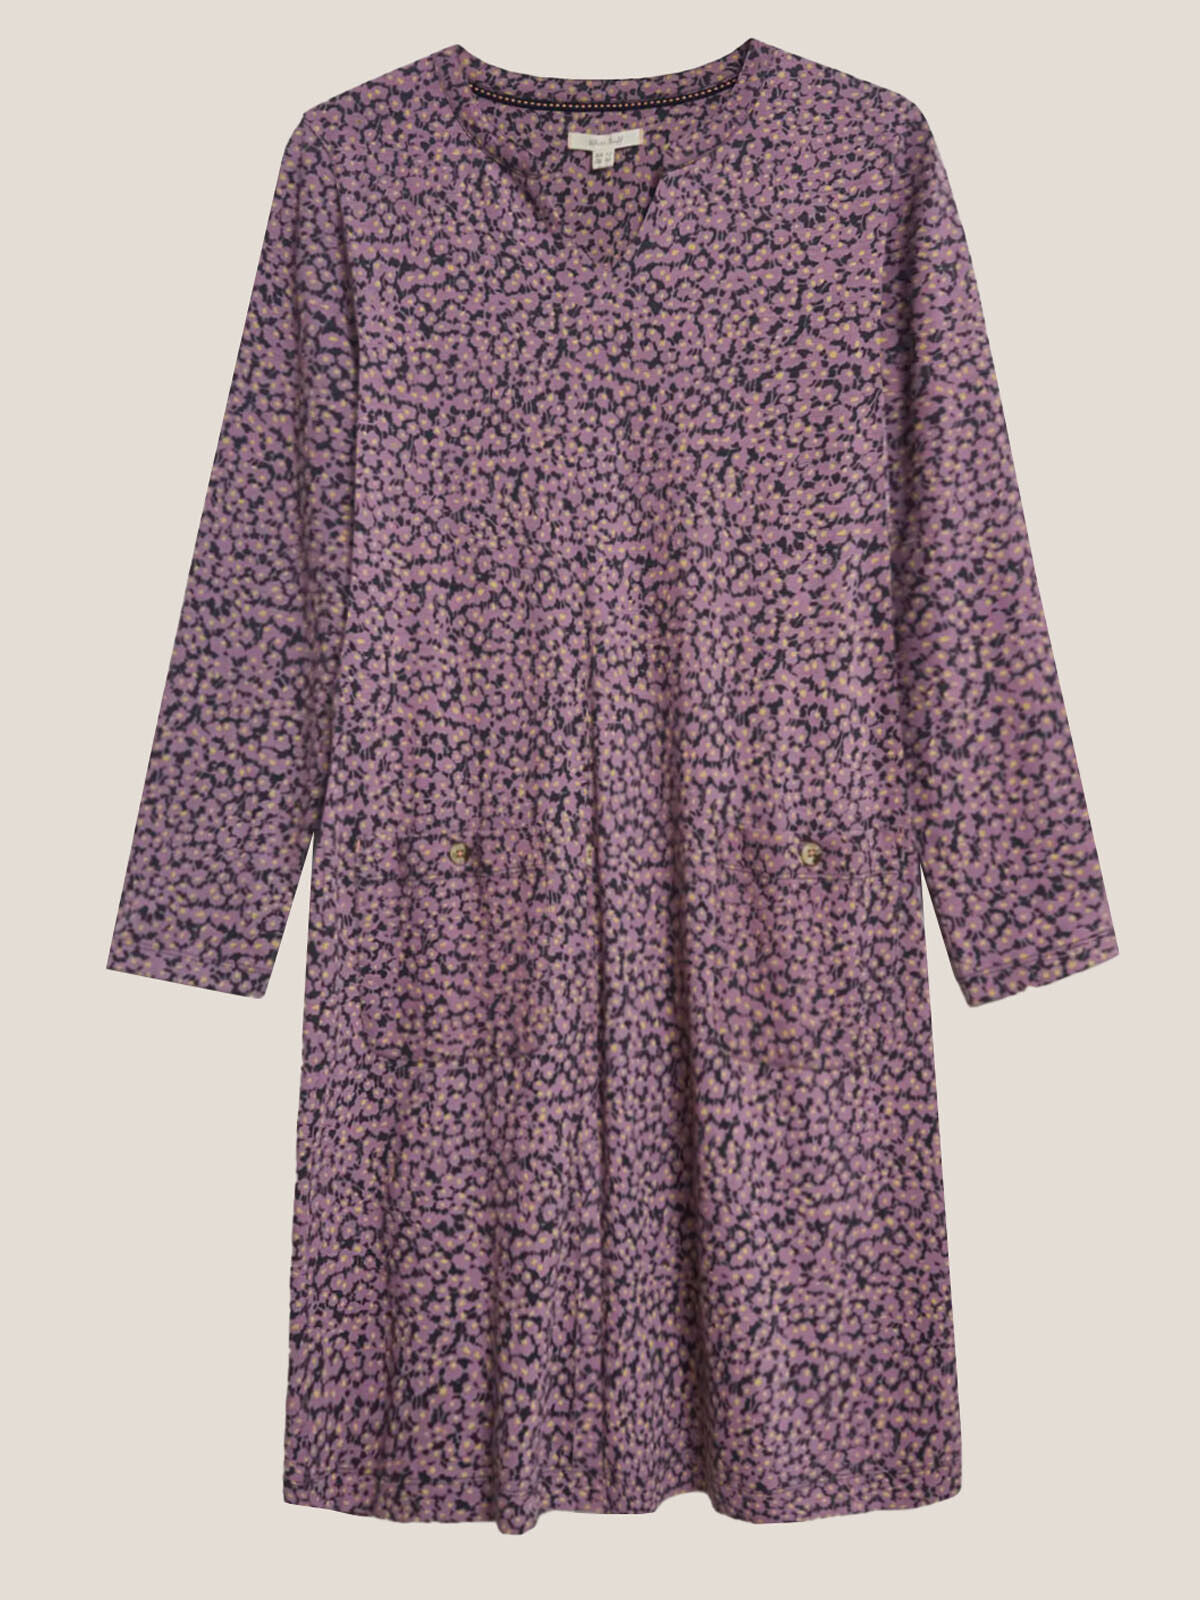 EX WHITE STUFF Pink Bea Fairtrade Dress in Sizes 8, 10, 12, 14, 16, 18 RRP £59